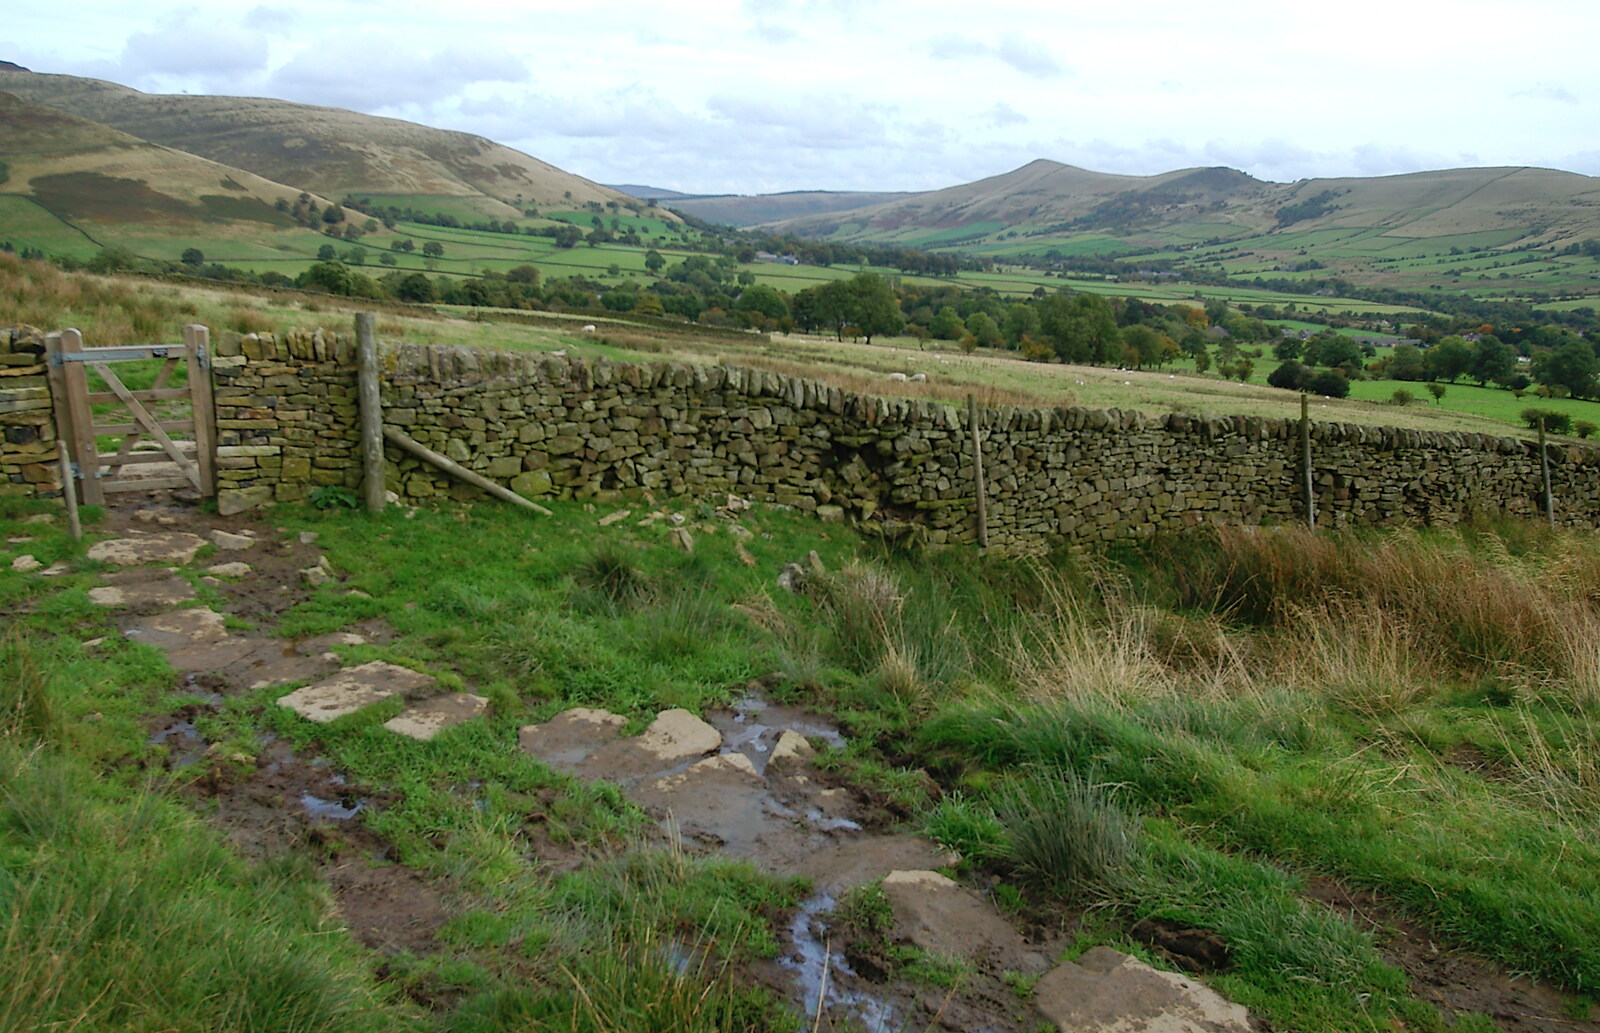 A dry-stone wall and a Pennine view from The Pennine Way: Lost on Kinder Scout, Derbyshire - 9th October 2005